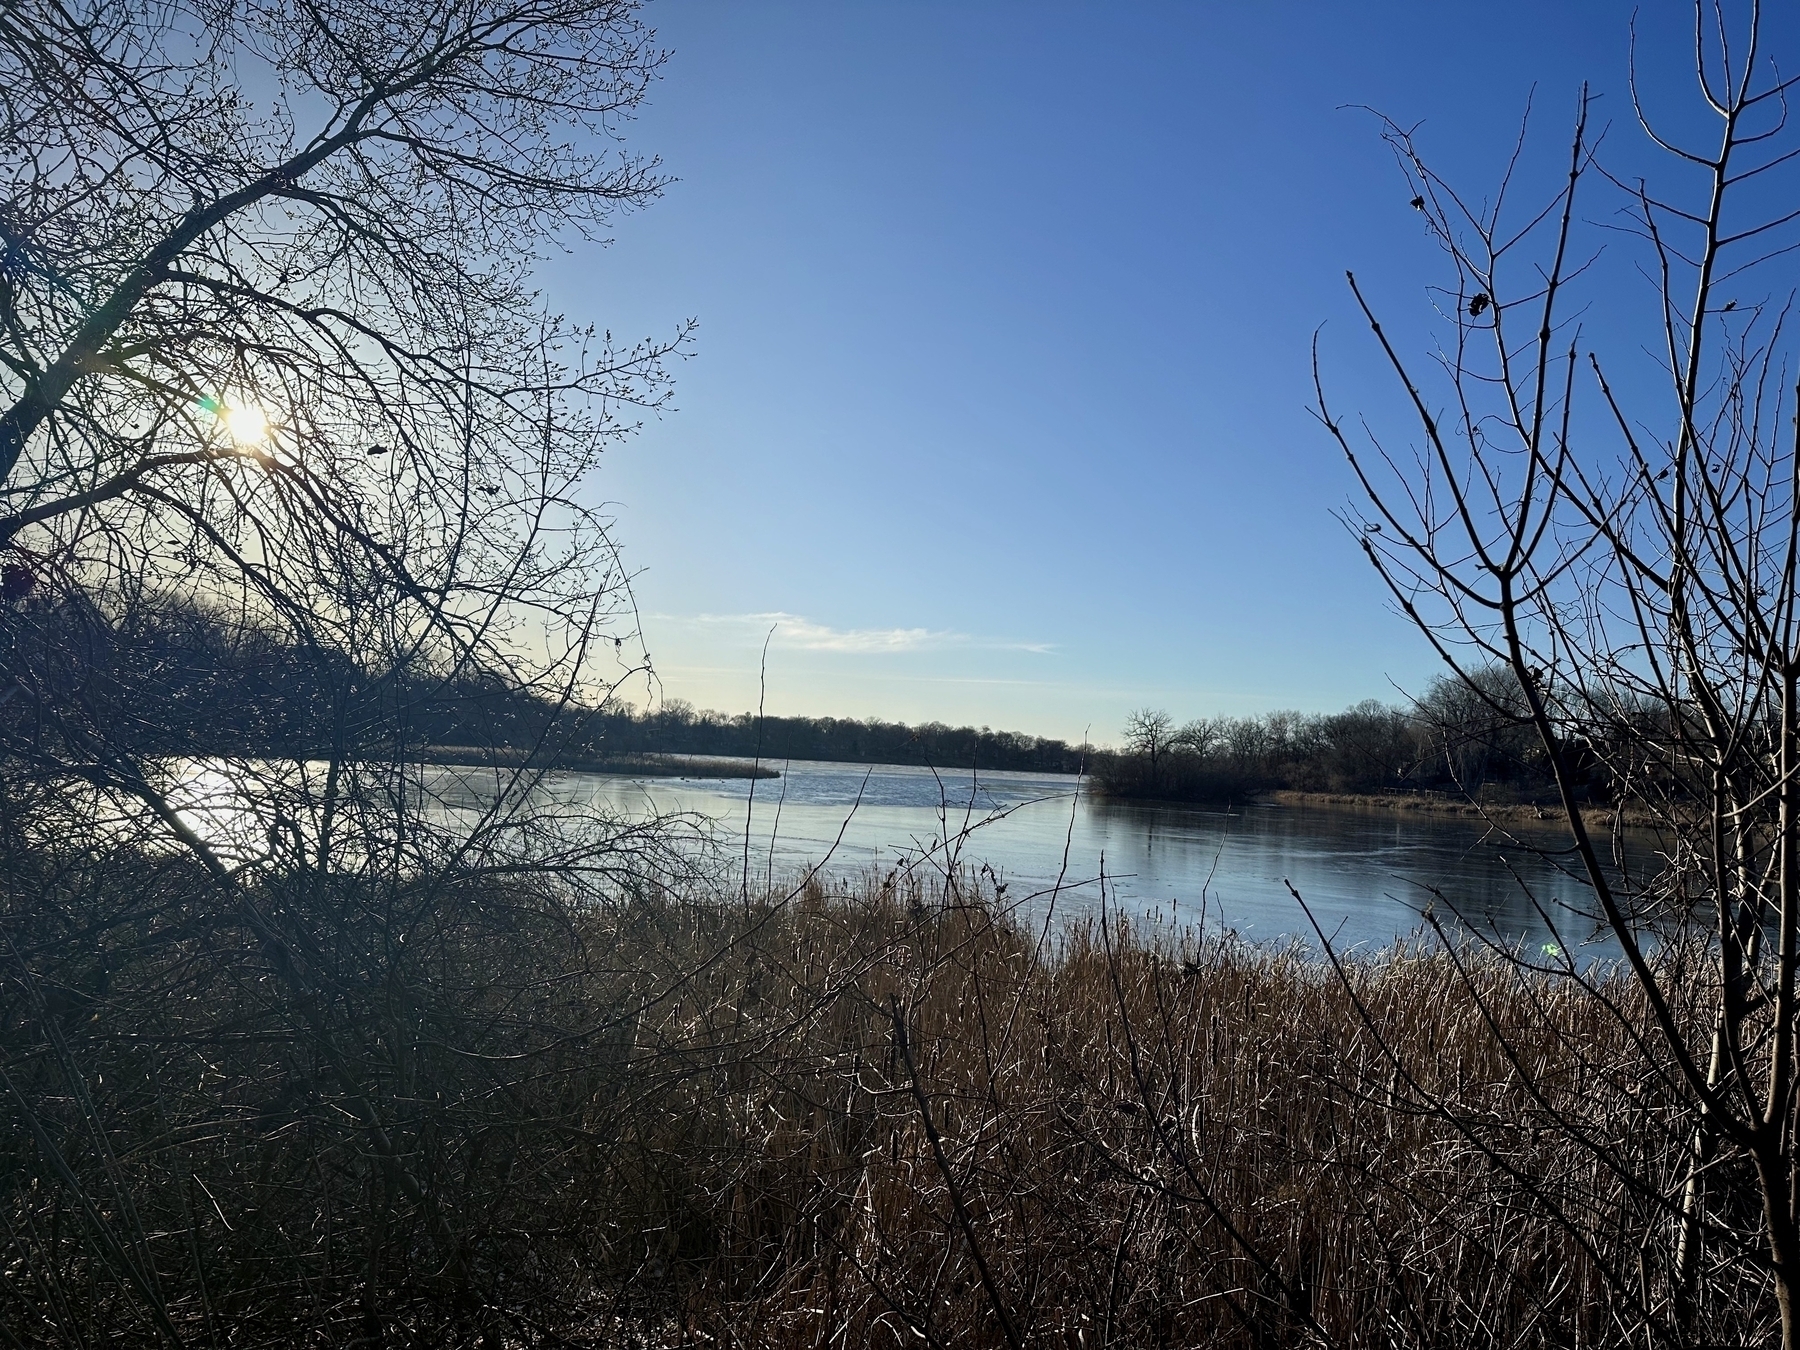 Bare branches frame a sunlit, partially frozen lake surrounded by dried reeds under a clear blue sky.